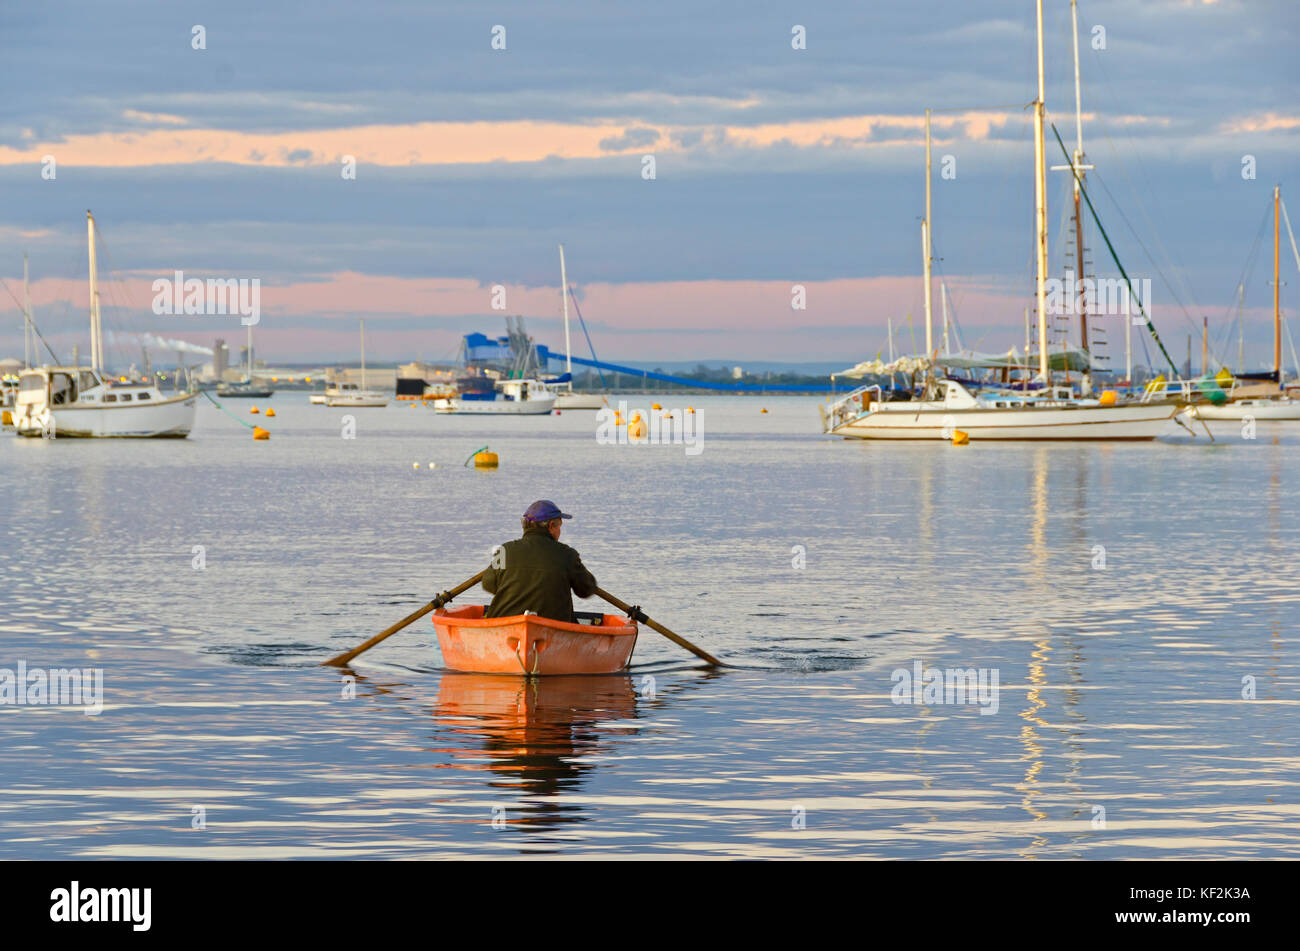 man rowing boat ashore in in quite waters of marina at dusk Stock Photo